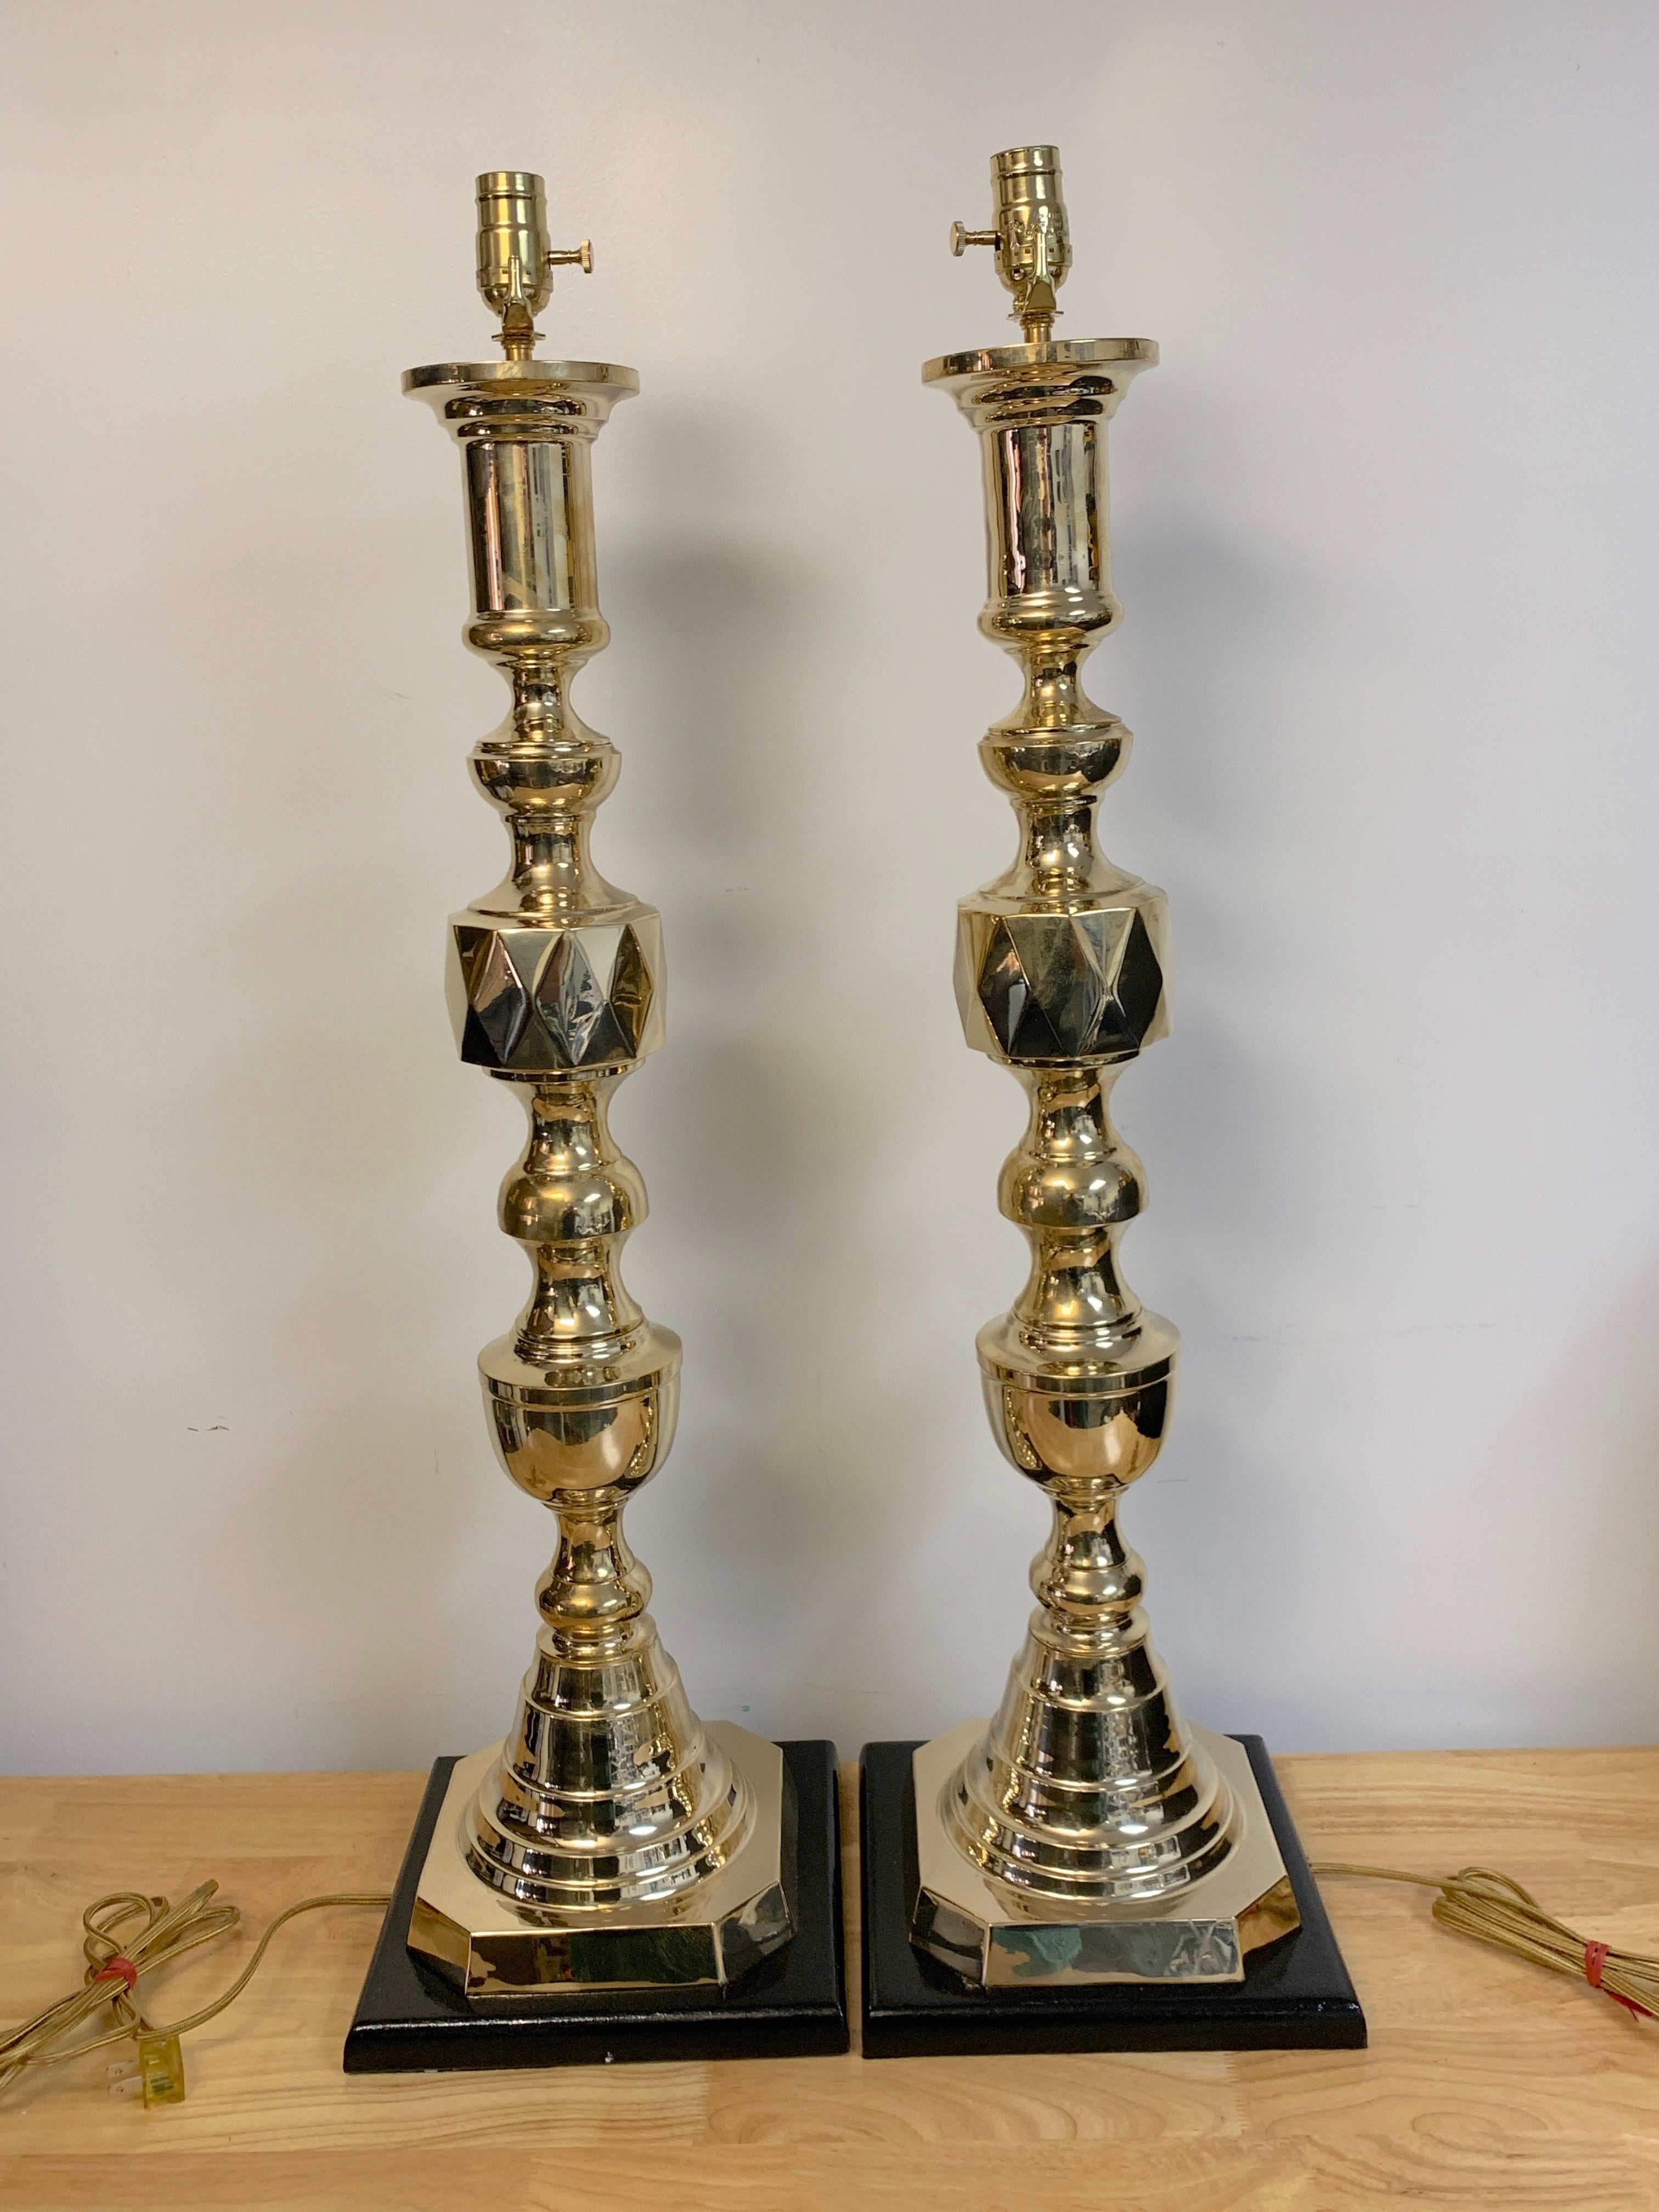 Pair of Monumental 'Ace of Diamonds' Brass Candlestick Lamps In Good Condition For Sale In West Palm Beach, FL